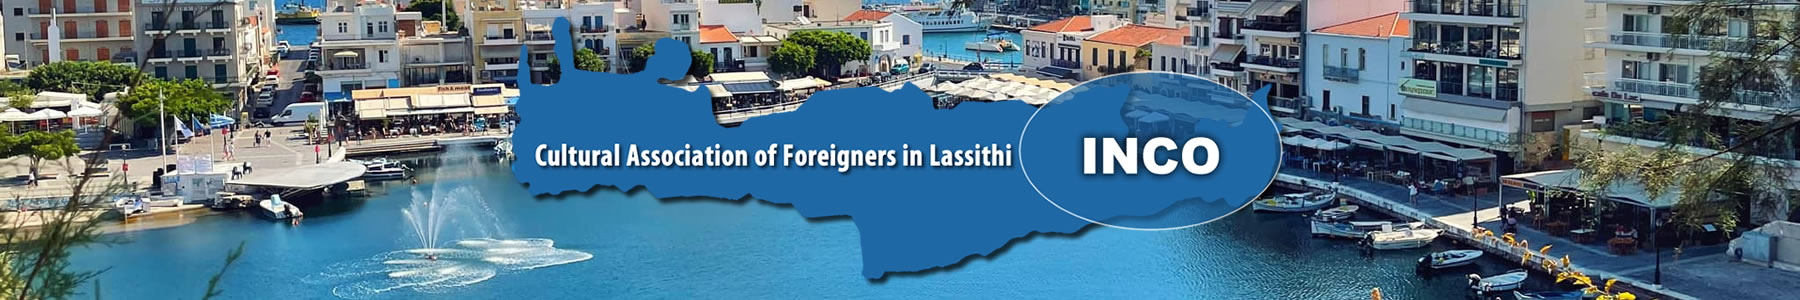 Cultural Association of Foreigners in Lassithi